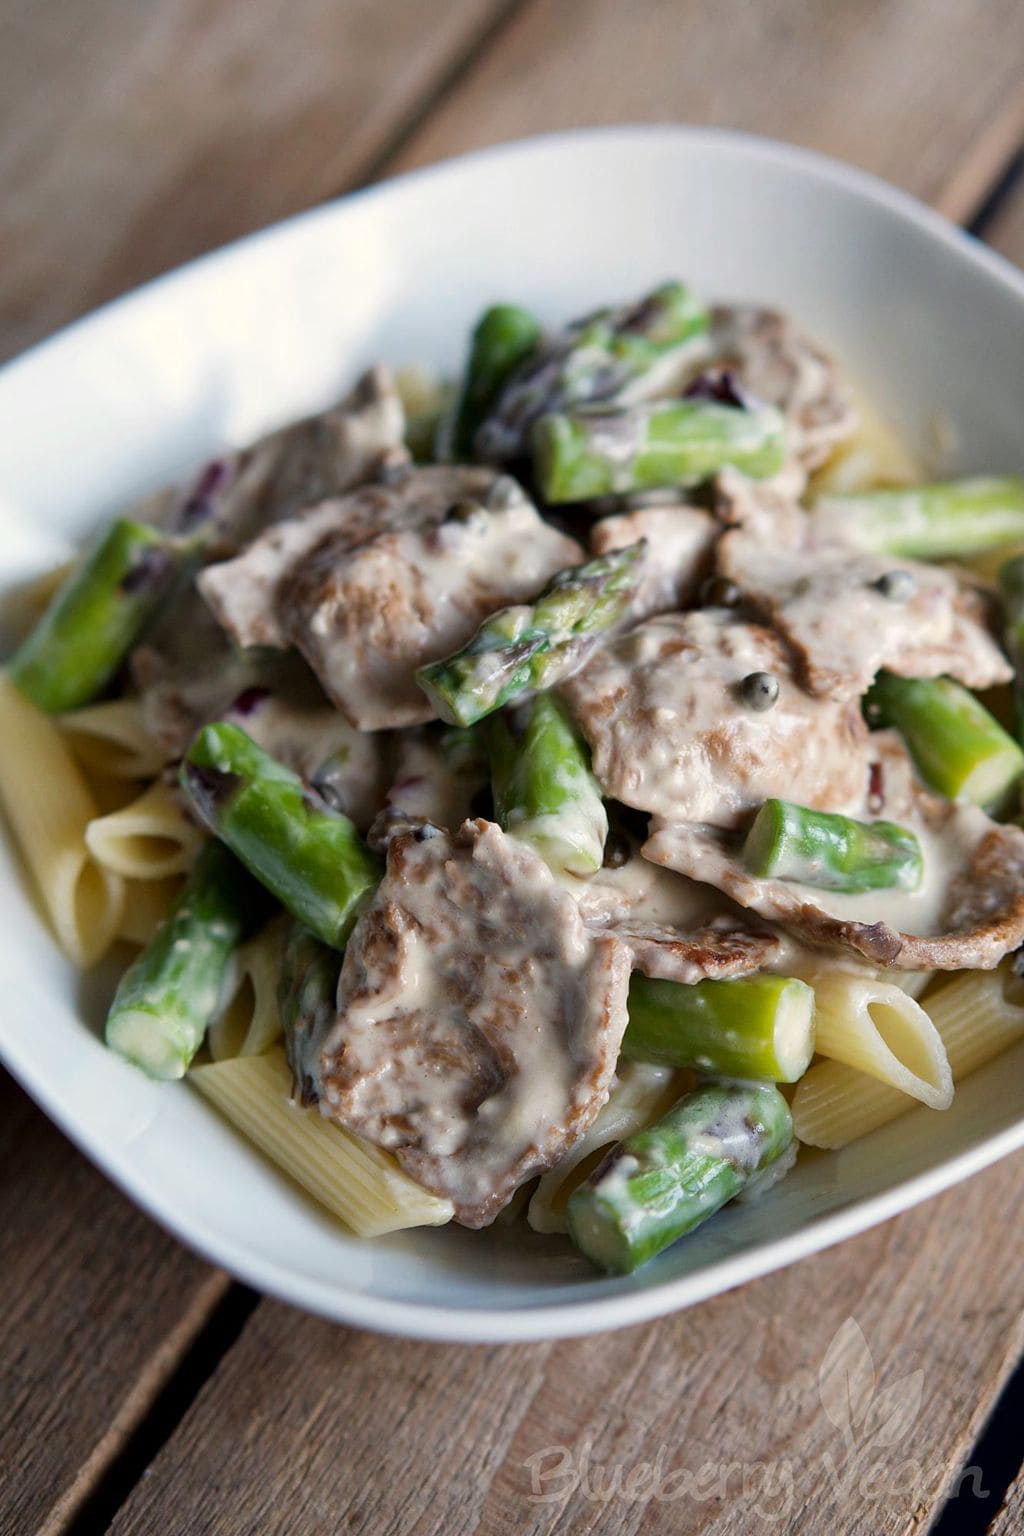 Asparagus with Soya Beef in Creamy Green Pepper Sauce